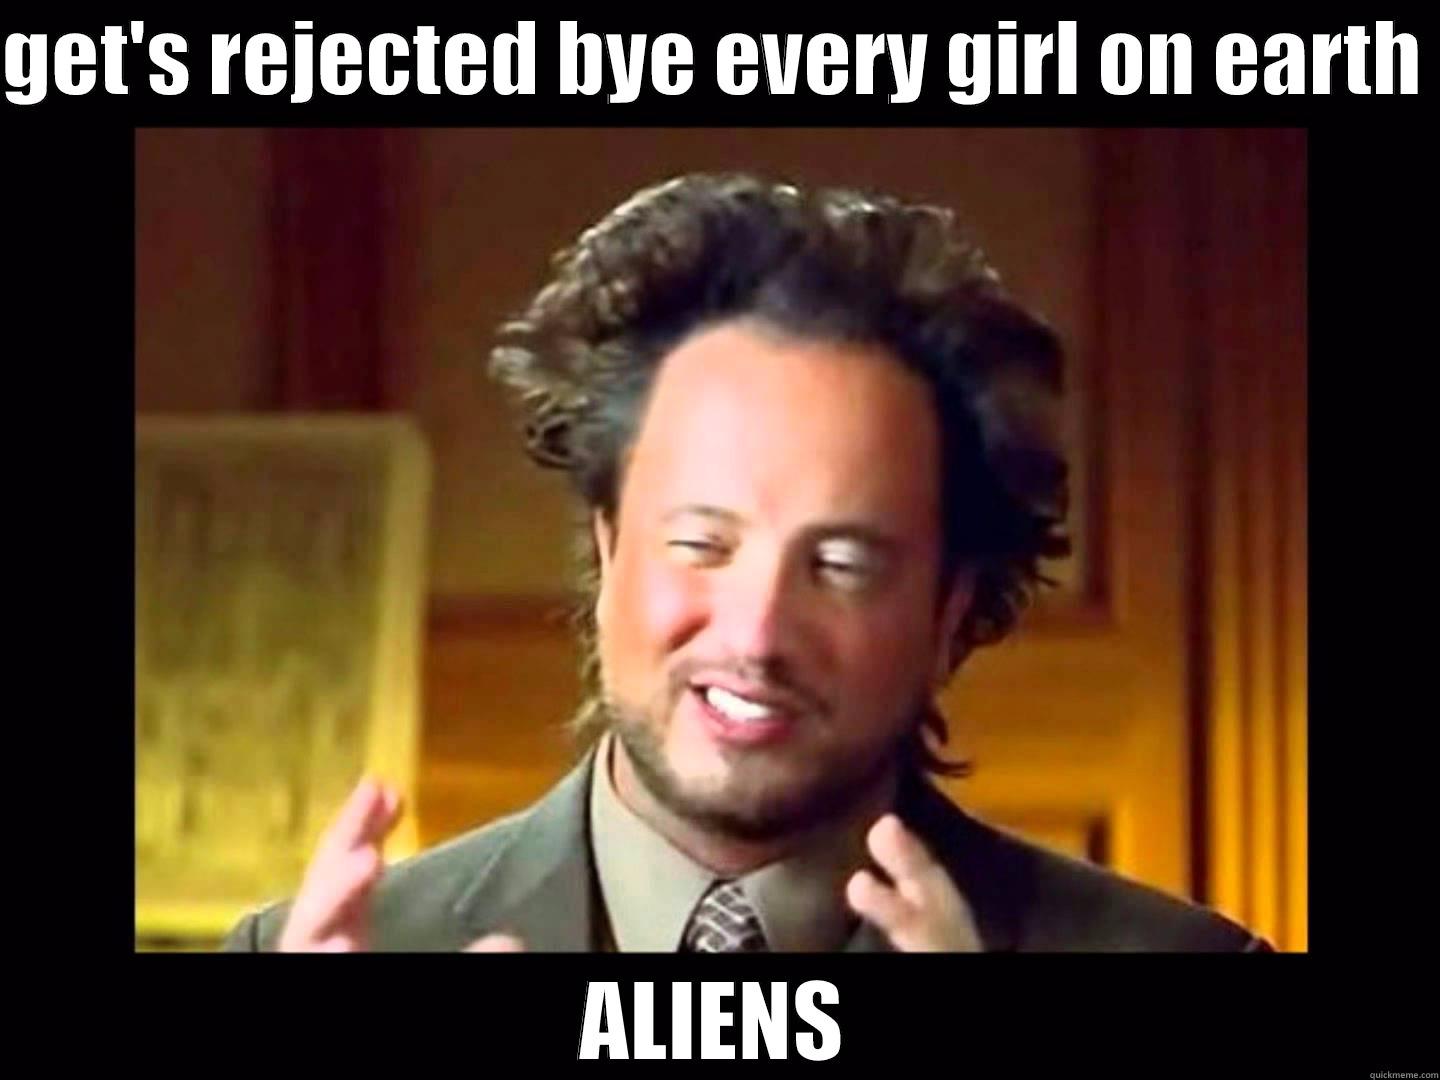 getting rejected  - GET'S REJECTED BYE EVERY GIRL ON EARTH  ALIENS Misc